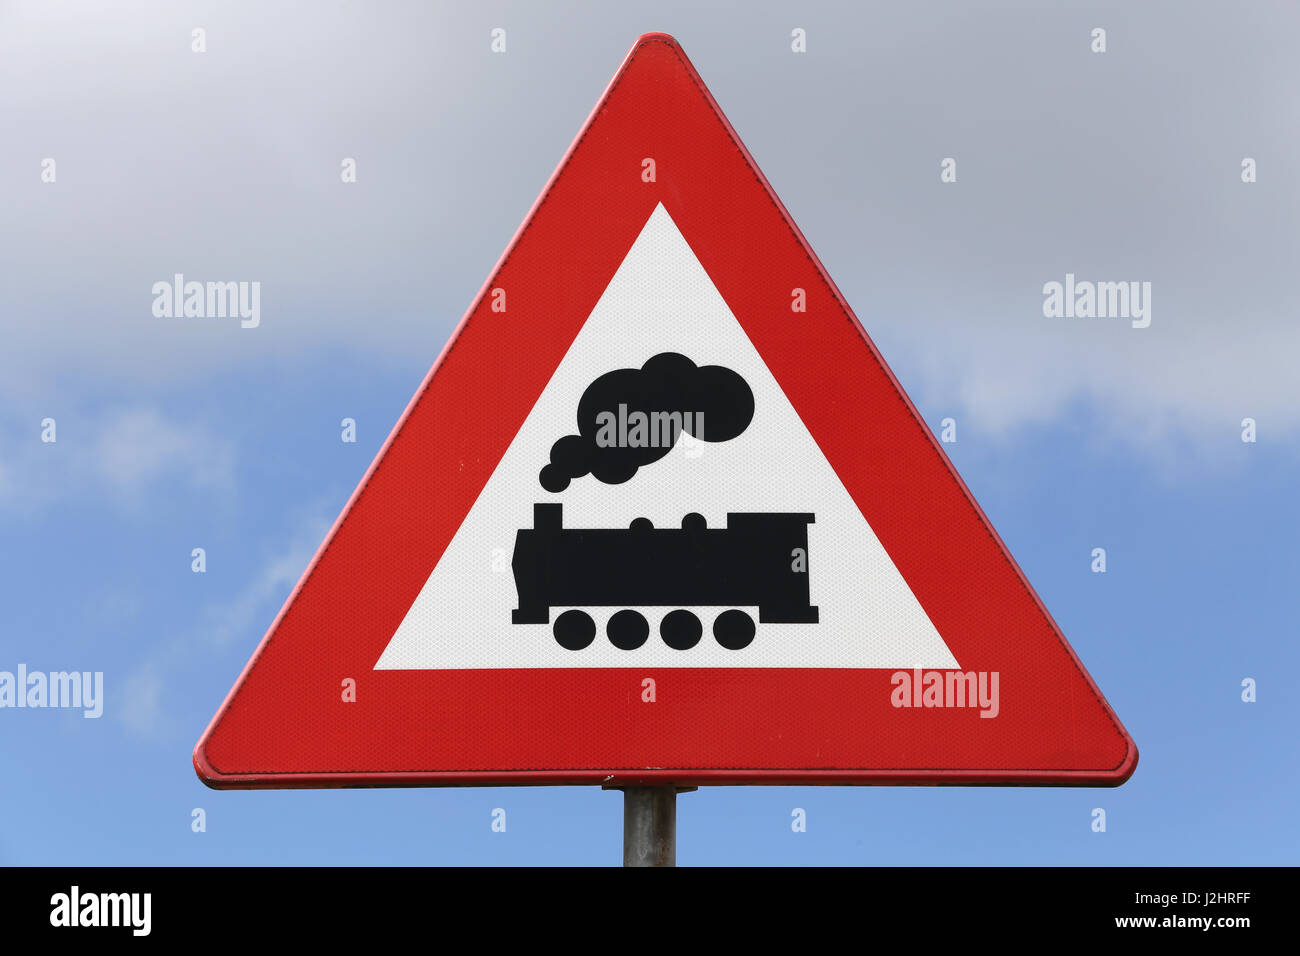 Dutch Road Sign Level Crossing Without Barrier Or Gates Ahead Stock Photo Alamy